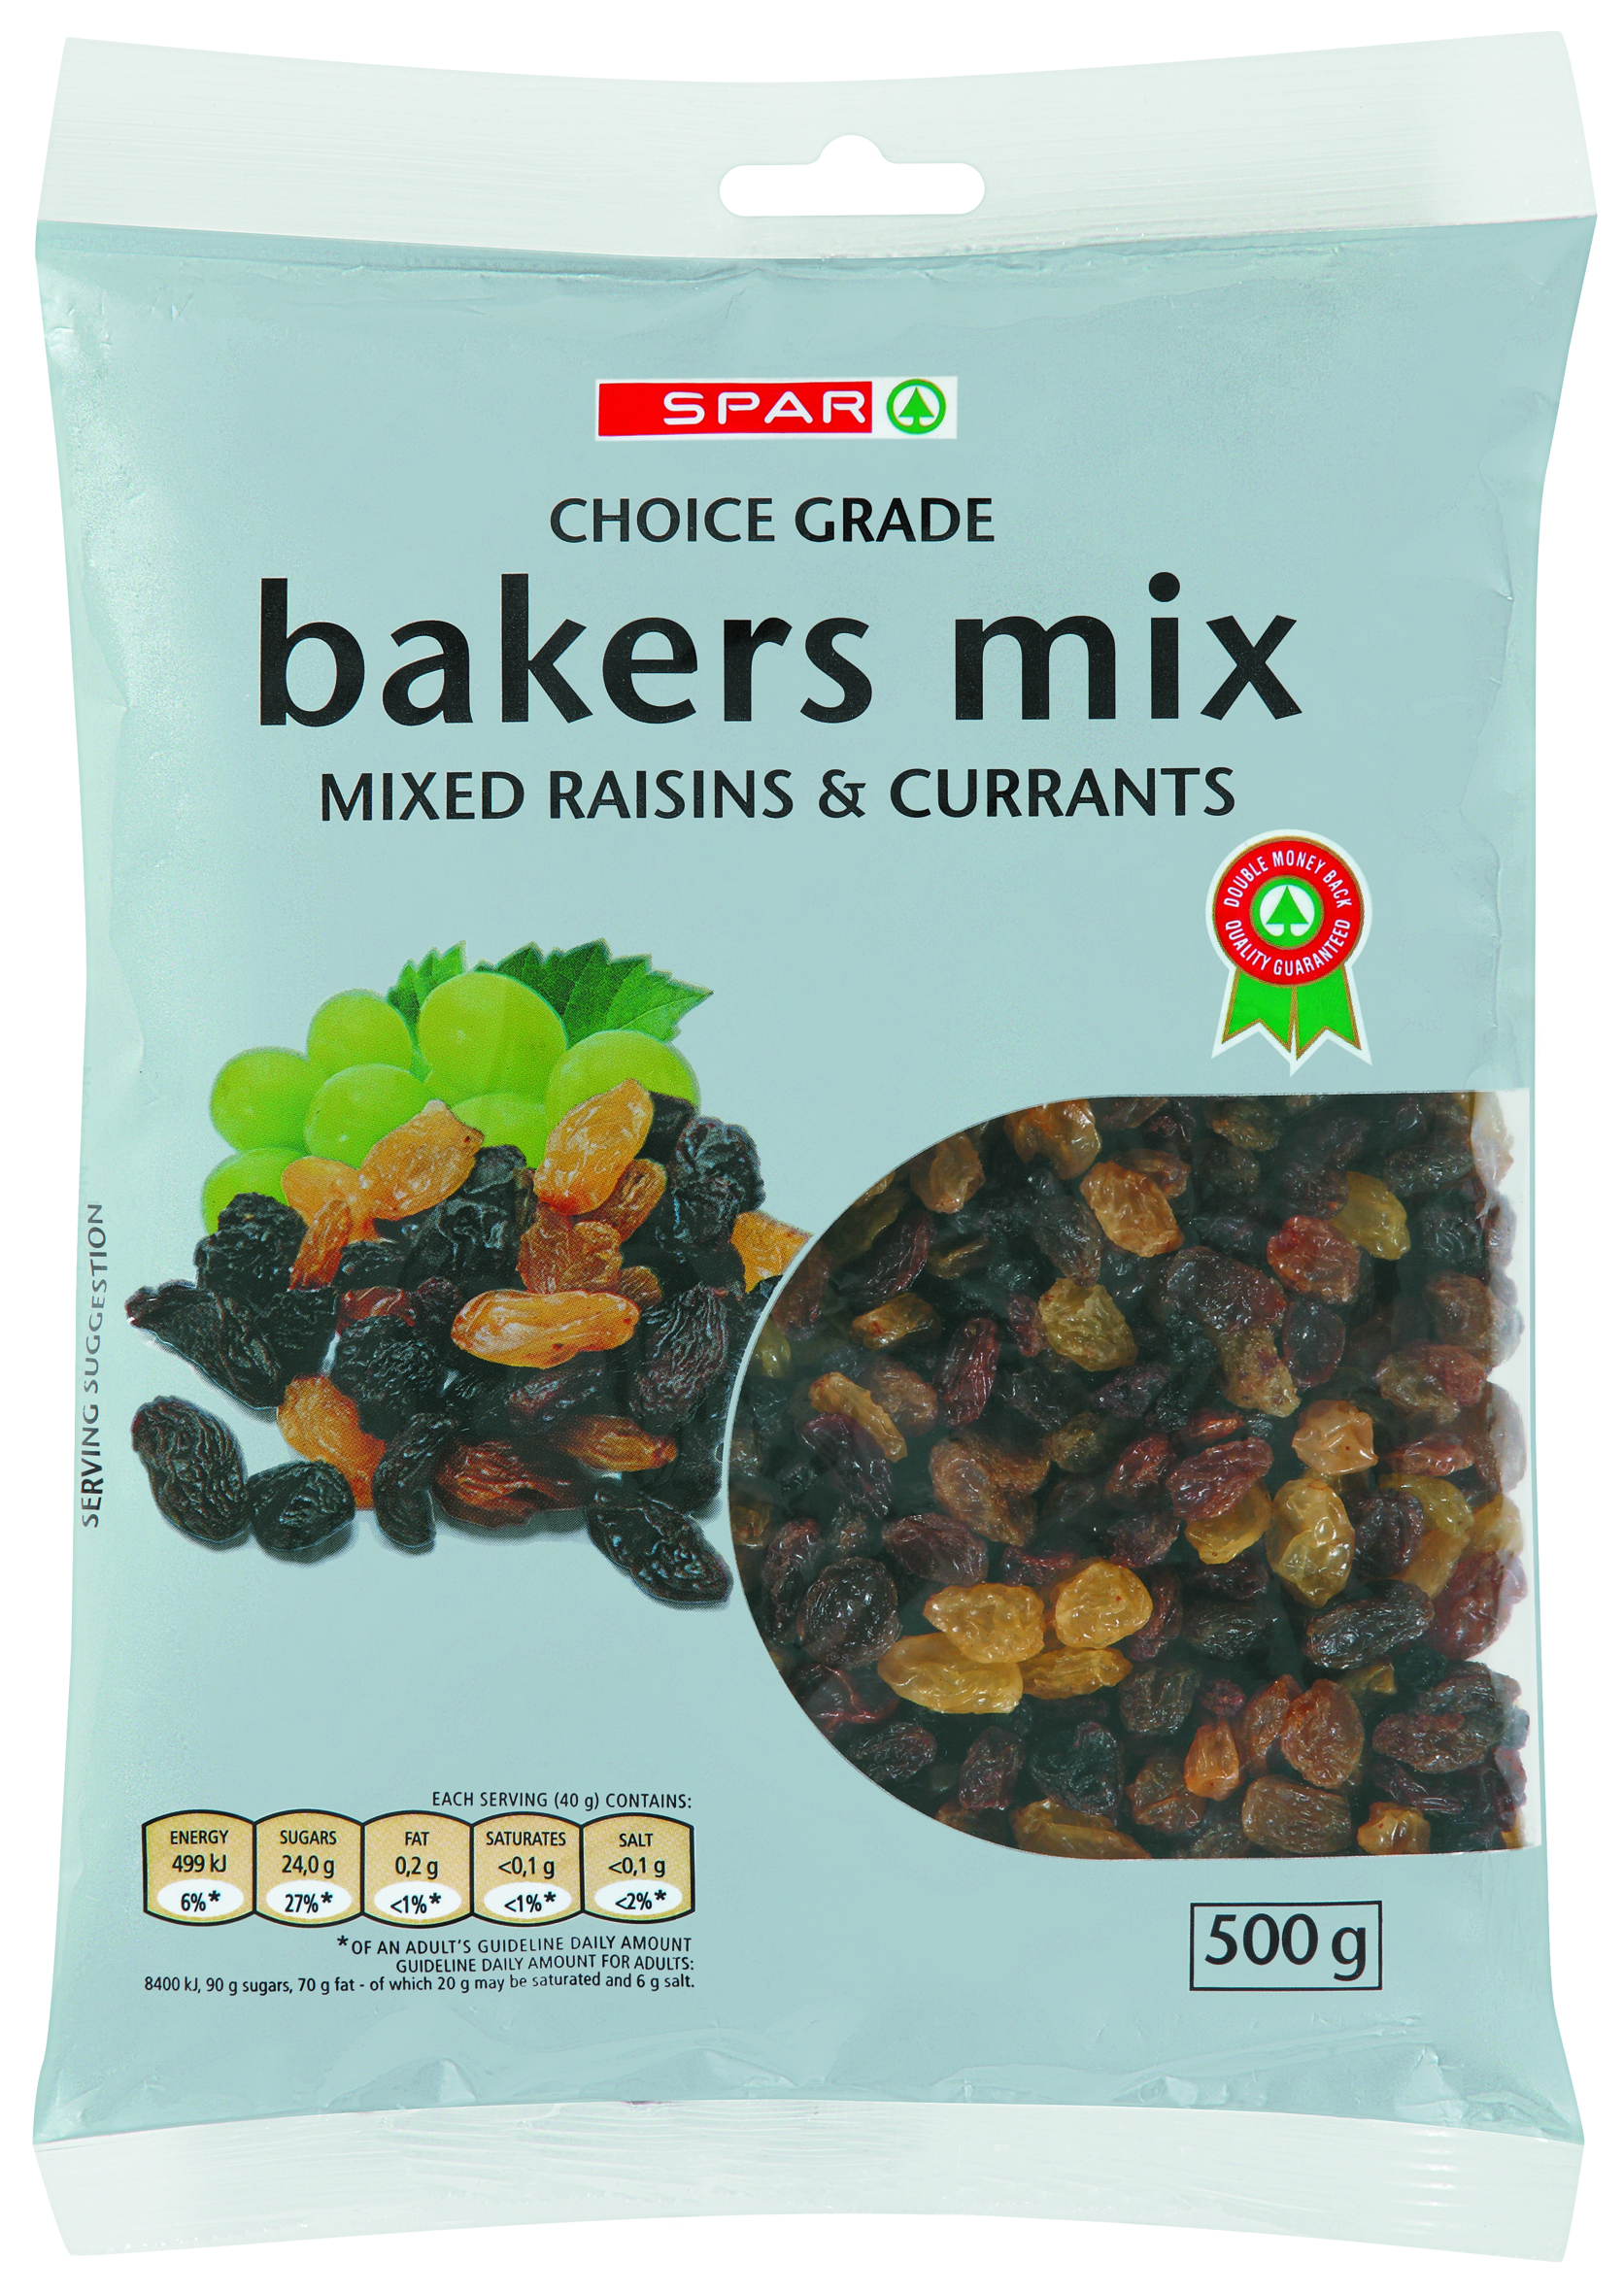 bakers mix